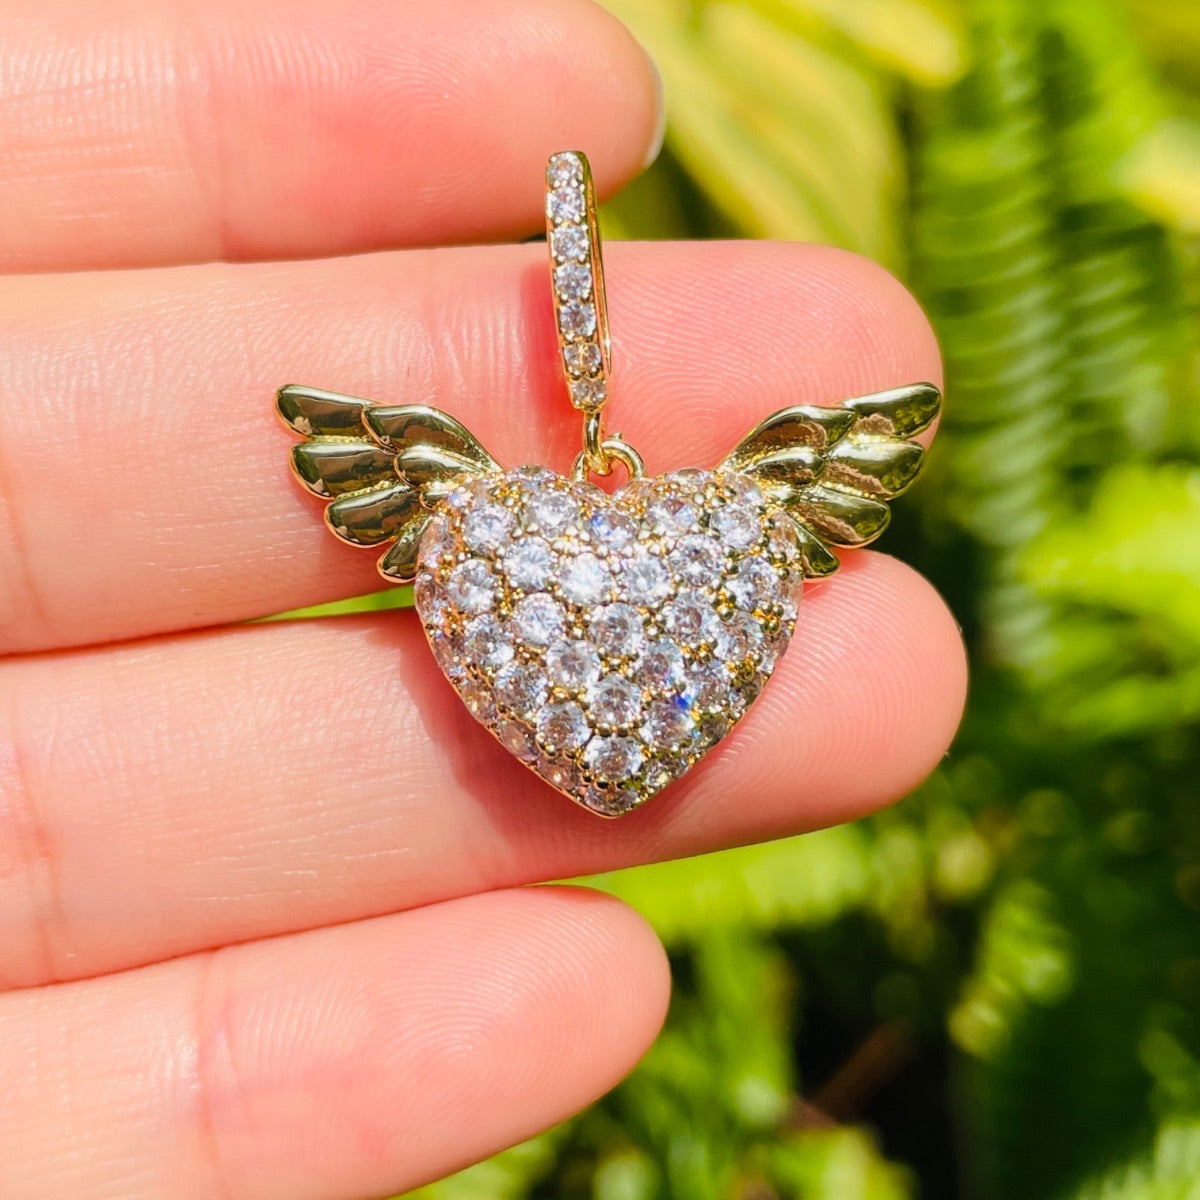 10pcs/lot 29.2*18.6mm CZ Paved Angel Wing 3D Heart Charms Gold CZ Paved Charms Hearts New Charms Arrivals Charms Beads Beyond